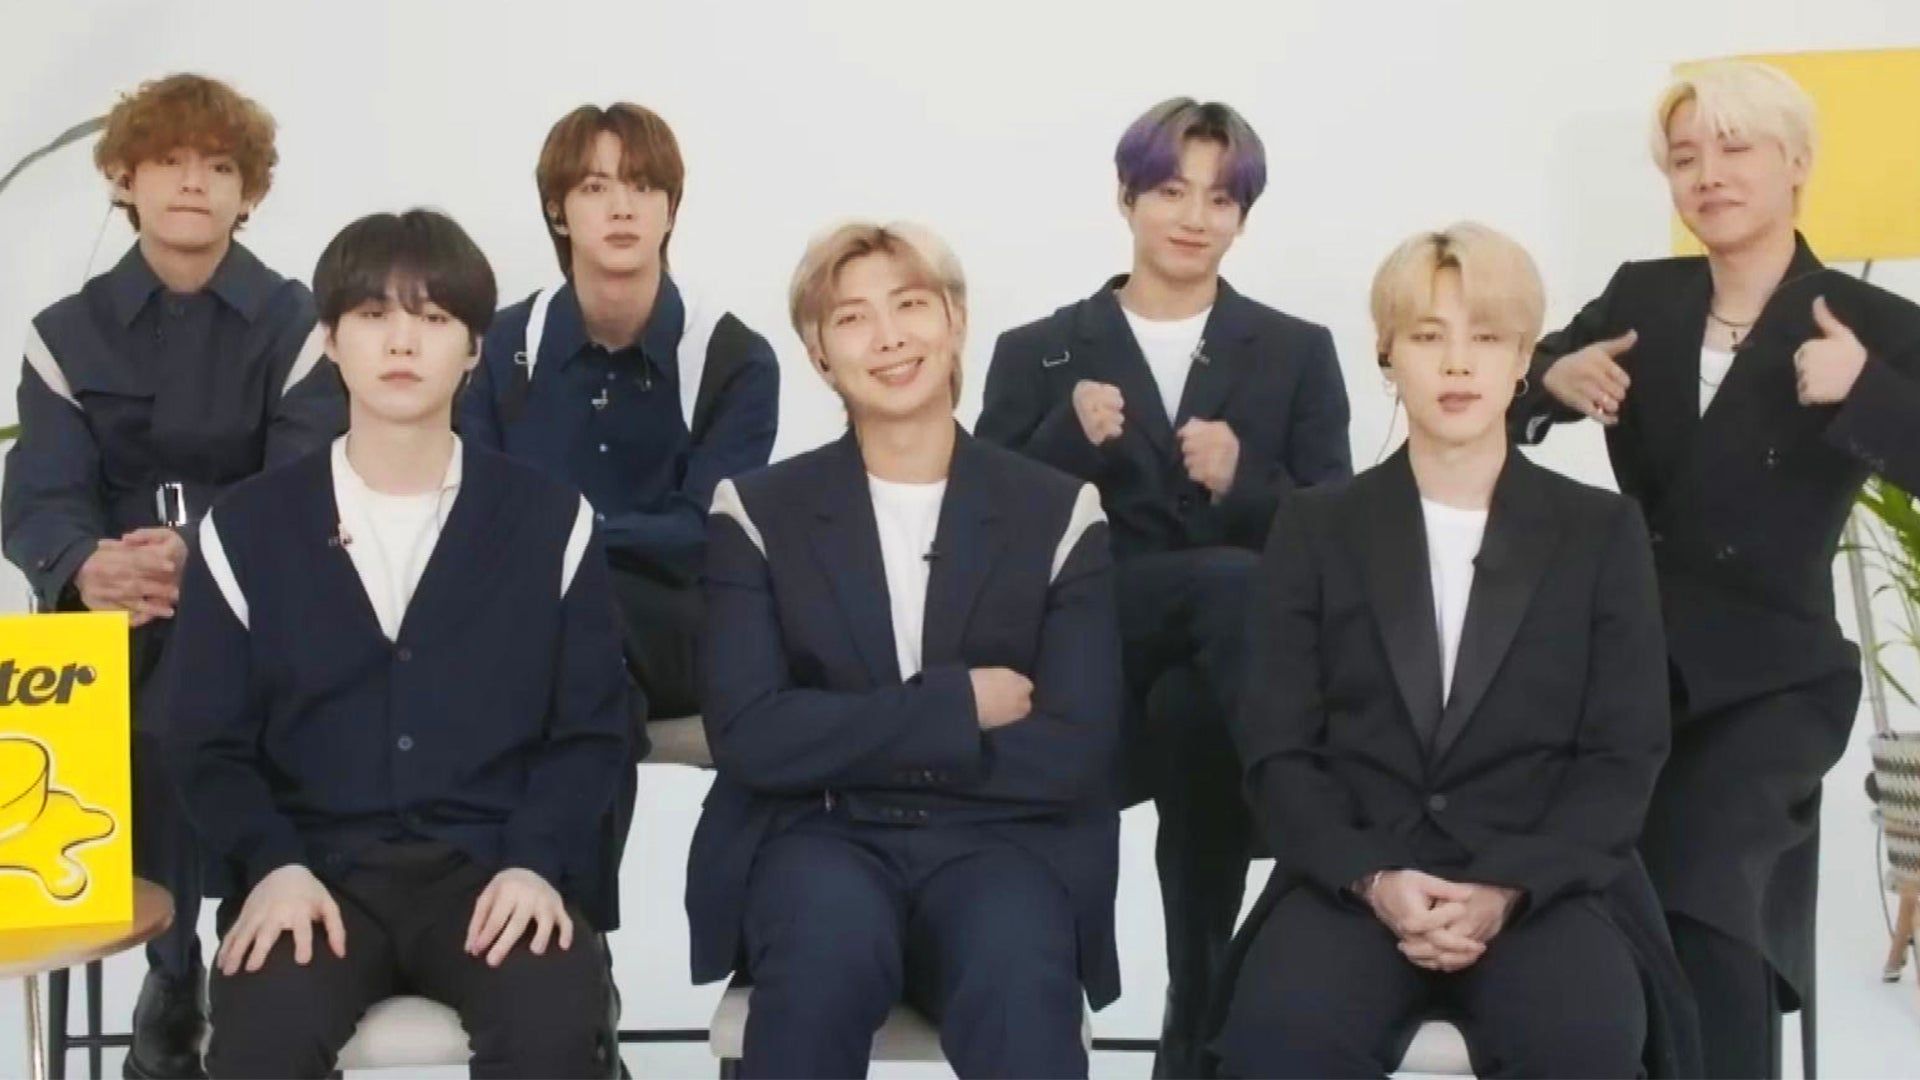 BTS on Working Hard to 'Have Our Voice Heard' in Support of AAPI Community (Exclusive)